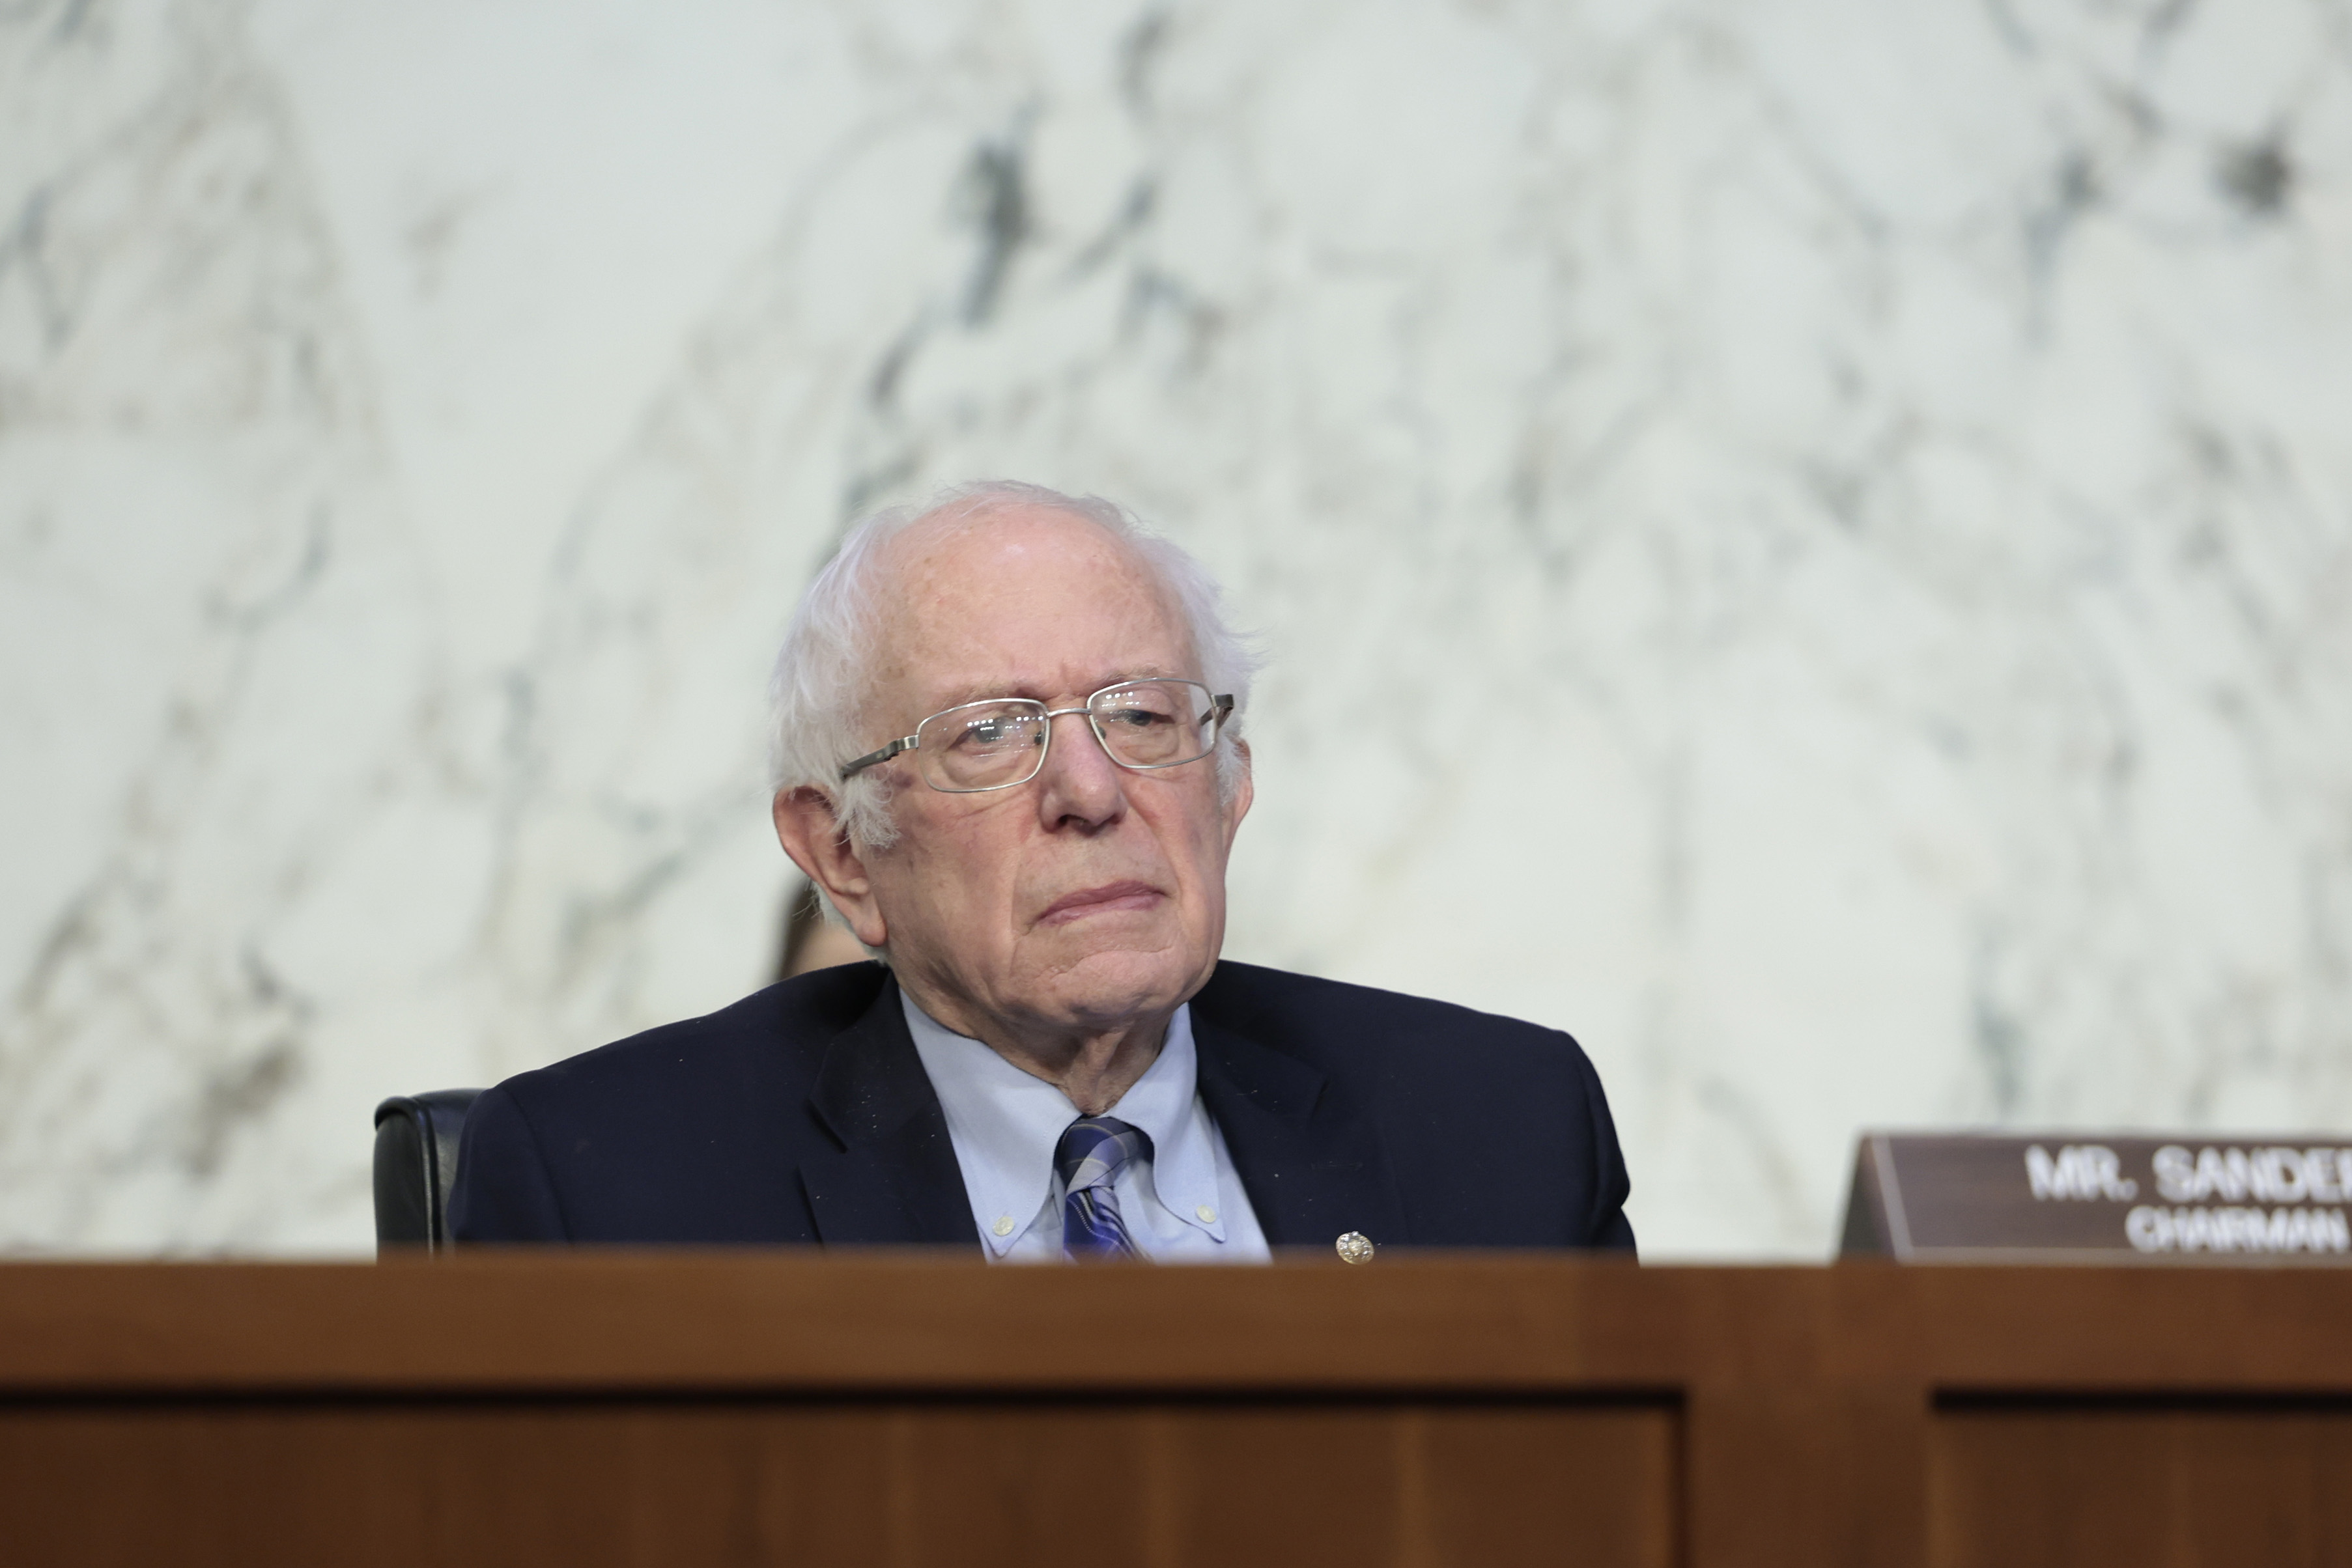 Bernie Sanders Supporters Excited About Possibility of 2024 Run